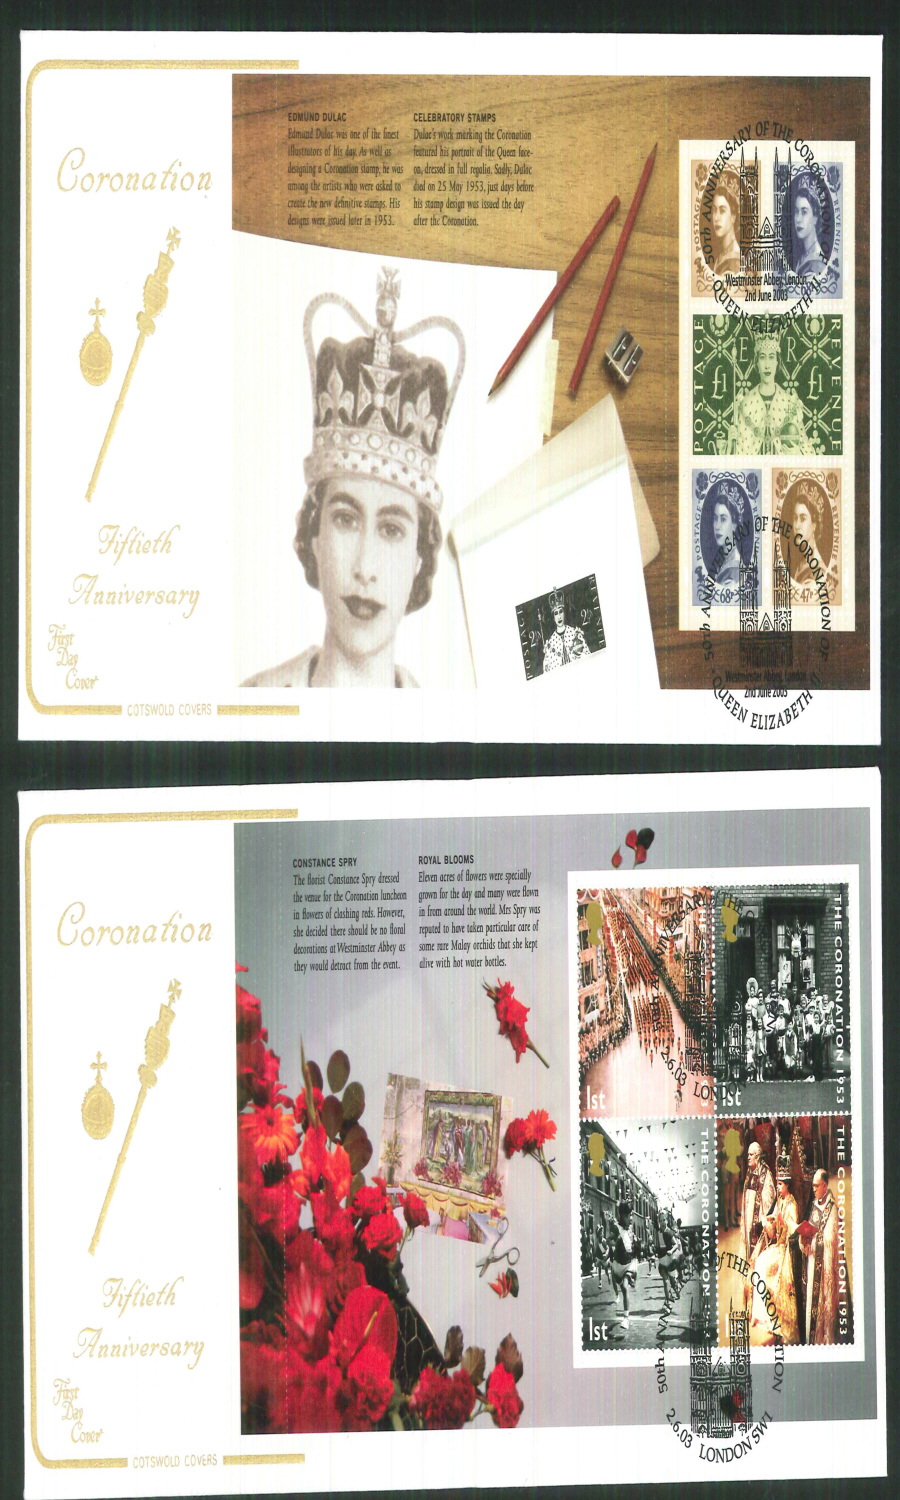 2003 - Coronation 50th Anniv - Prestige Stamp Book Set of 4 Covers - Various Postmarks